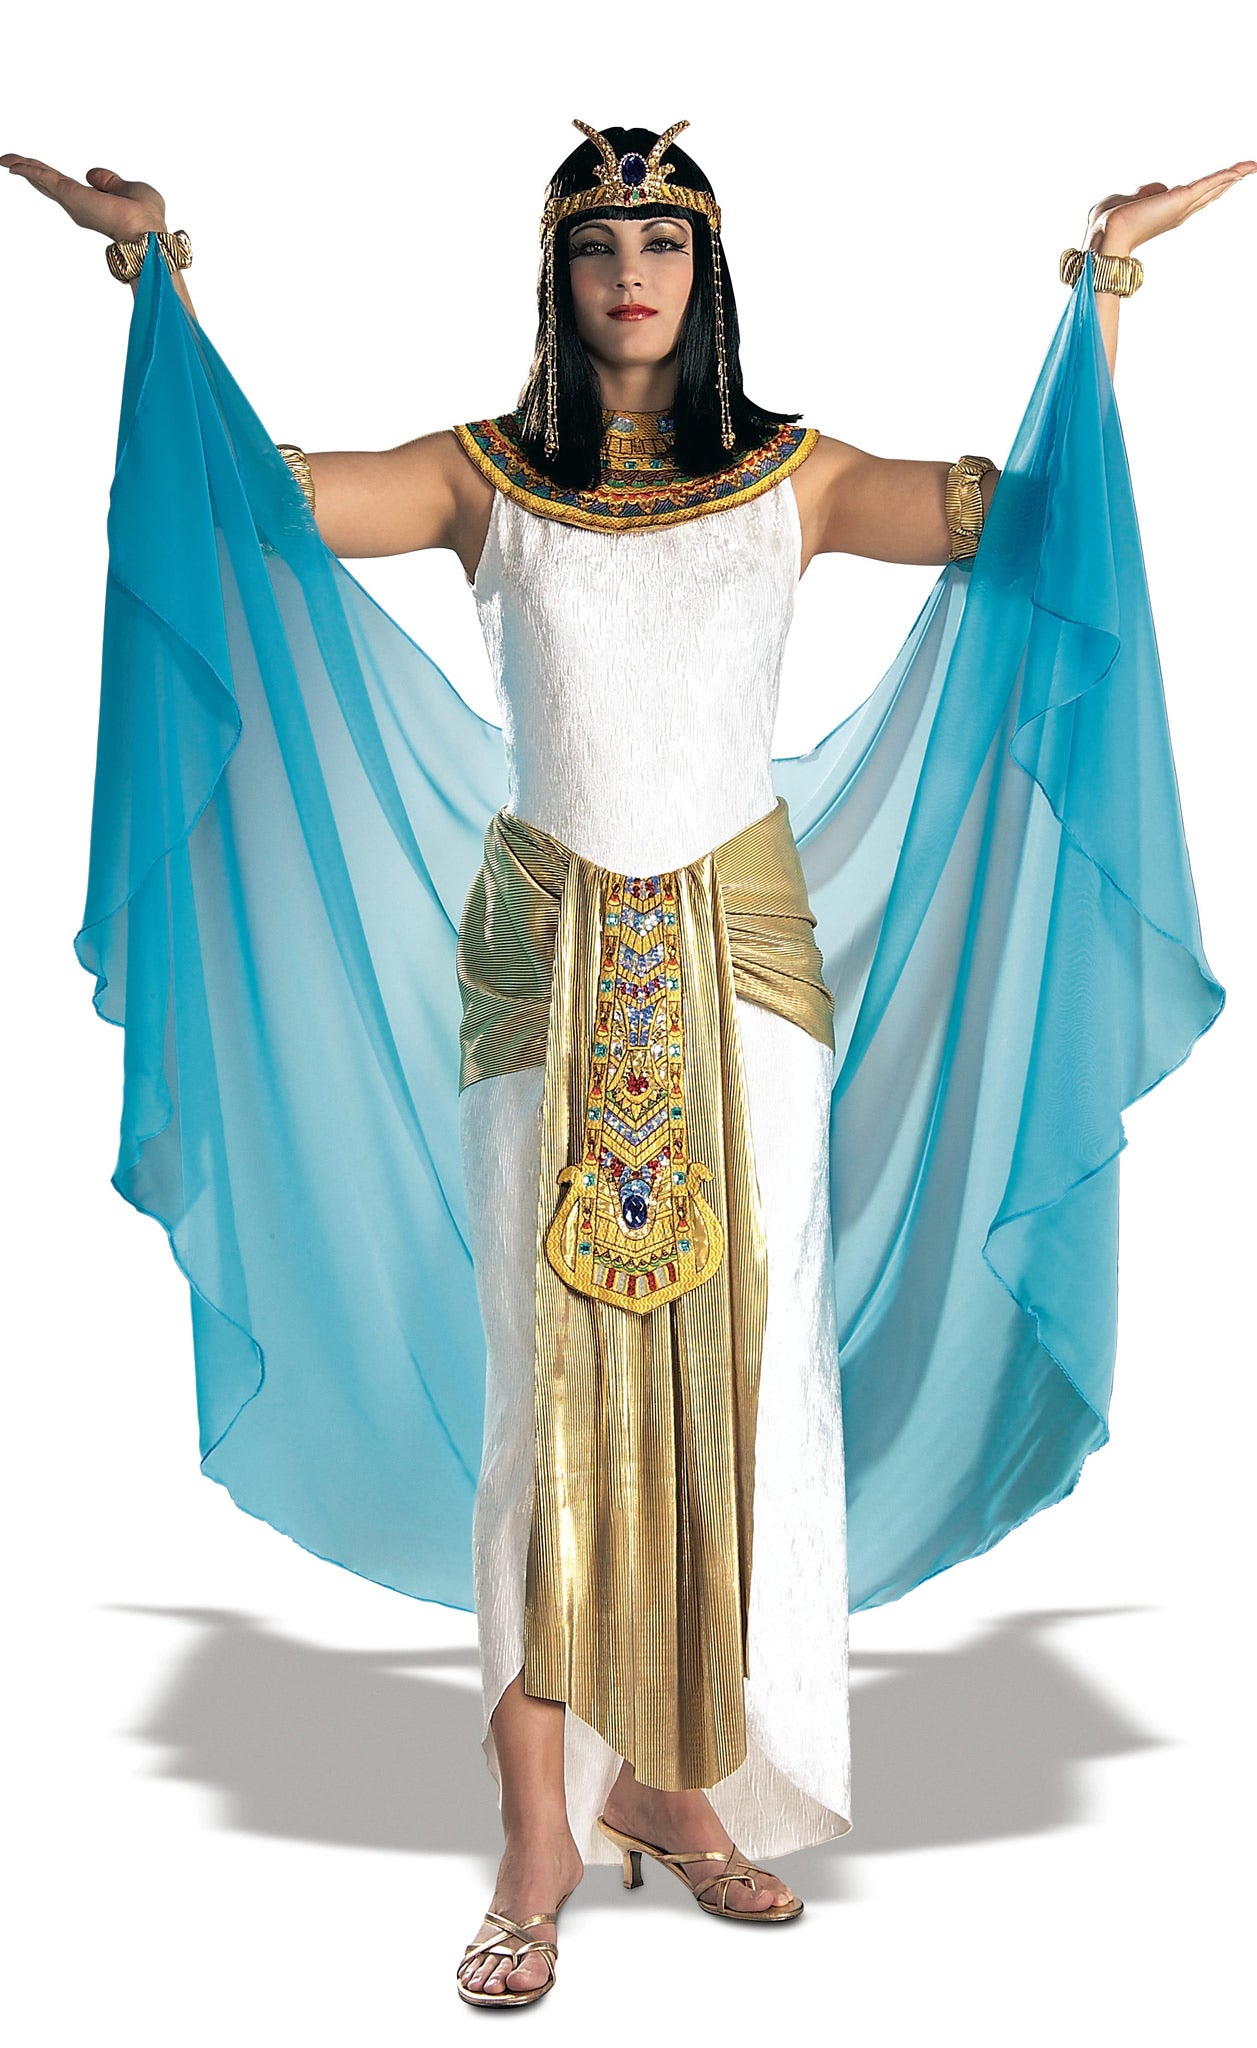 Long white Cleopatra dress with blue hip scarf, headpiece and arm cuffs